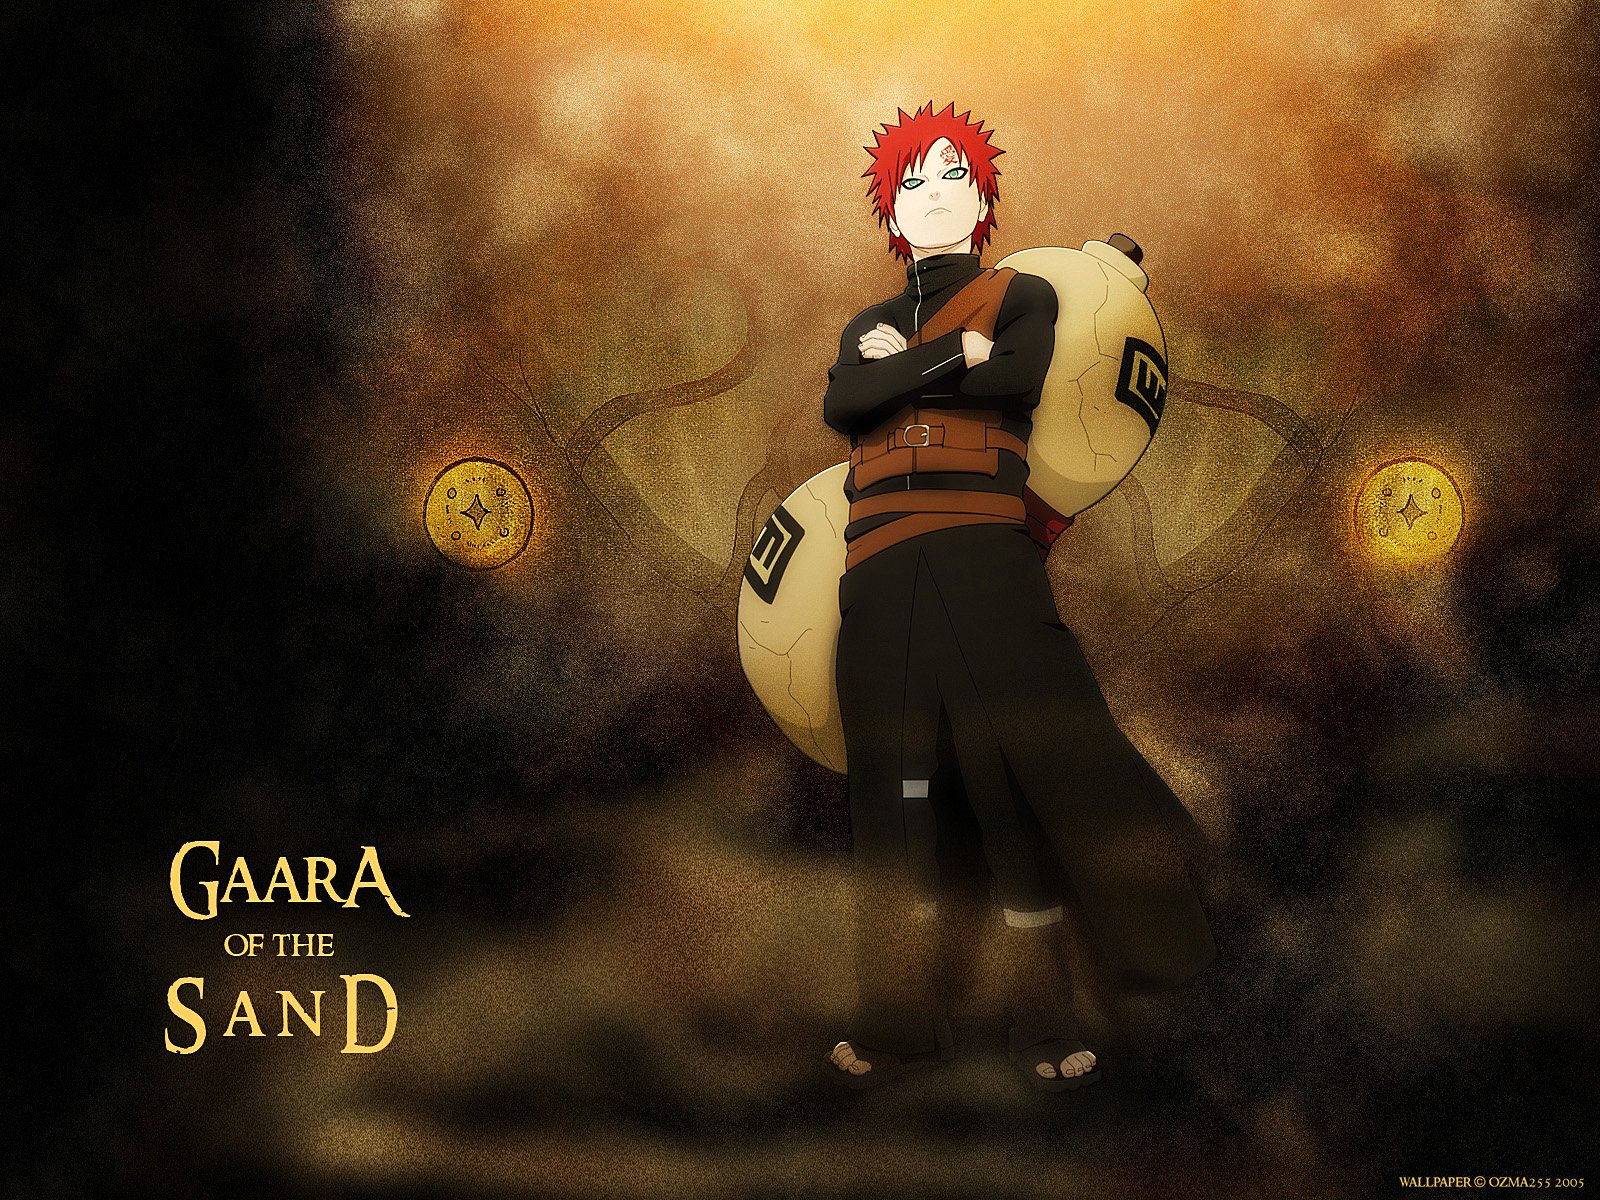 Gaara pictures and wallpapers